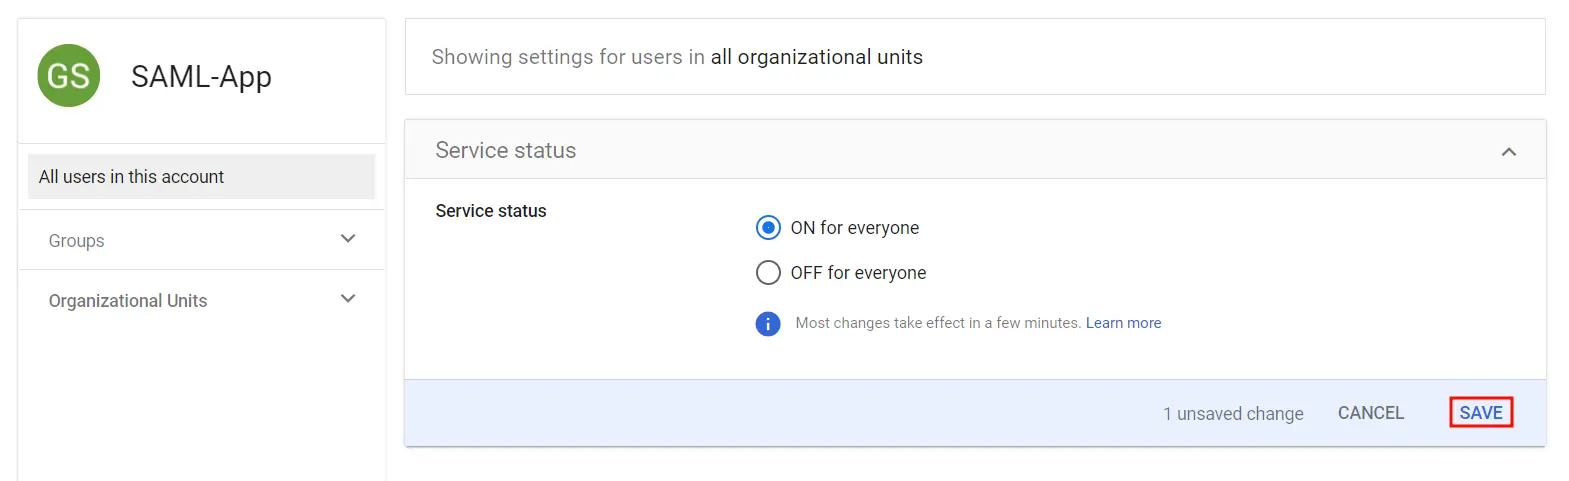 SAML App's service status with ON for everyone option enabled